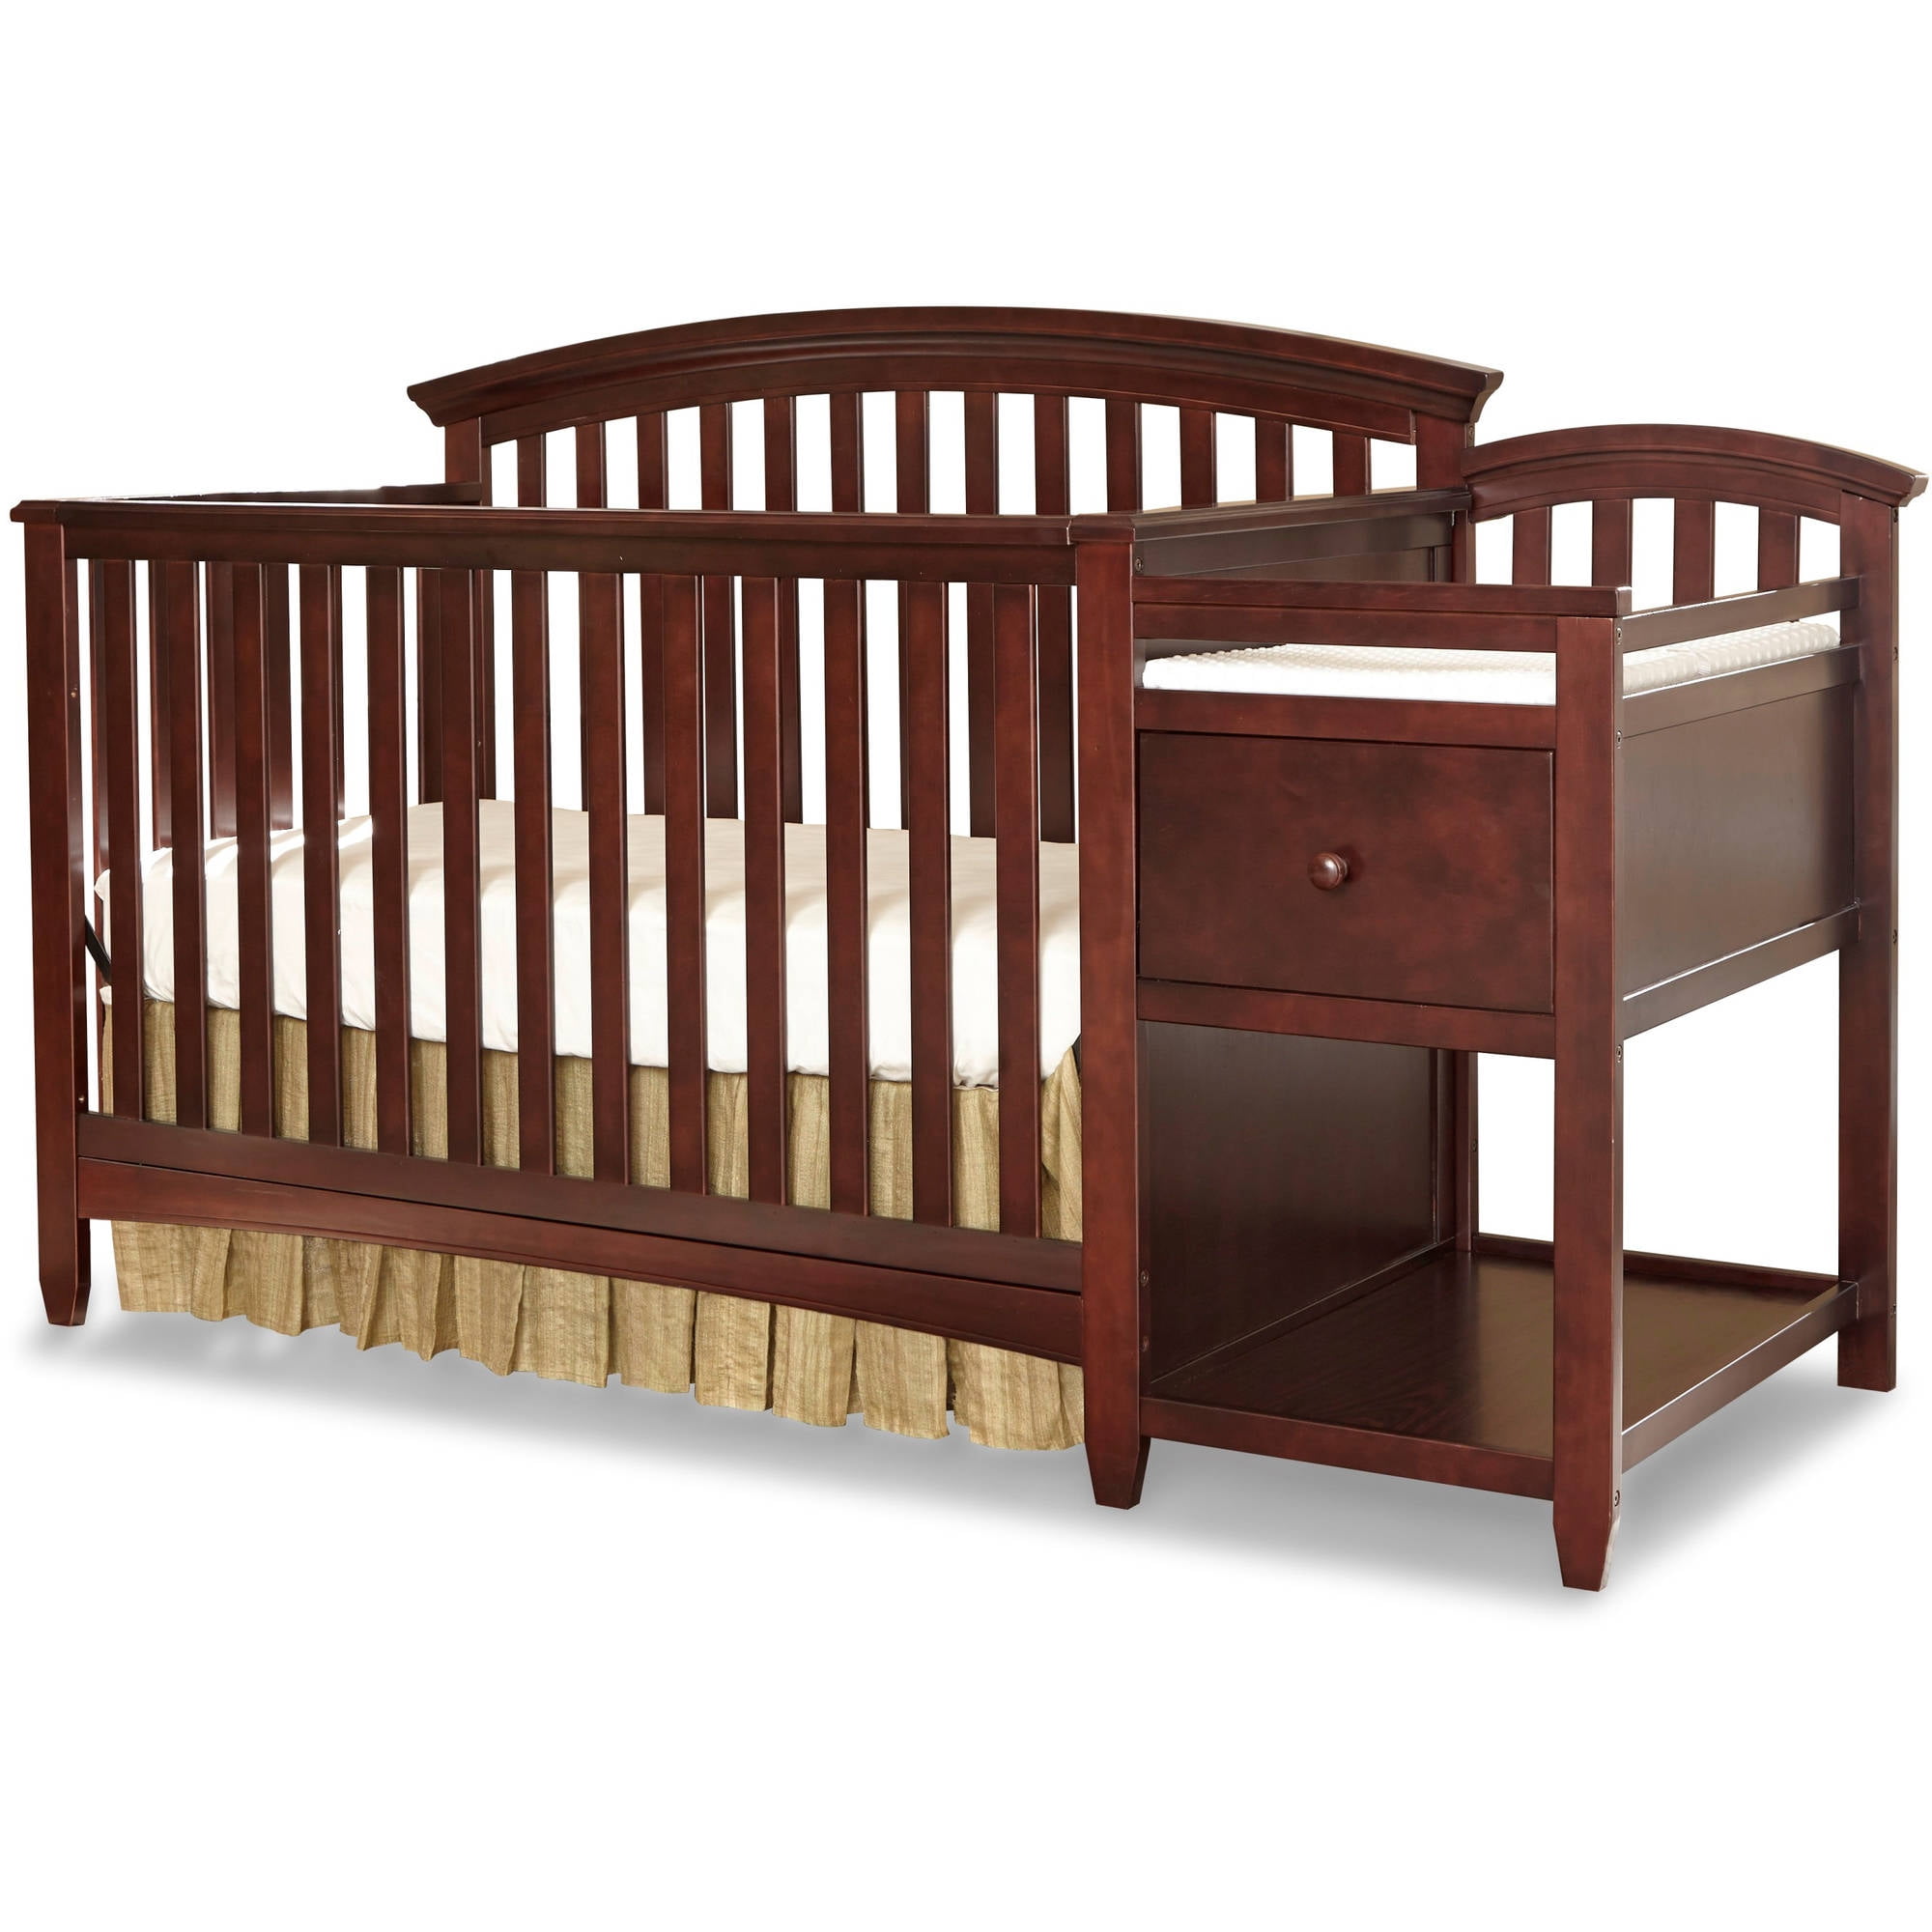 Imagio Baby Montville 4 In 1 Fixed Side Crib And Changing Table